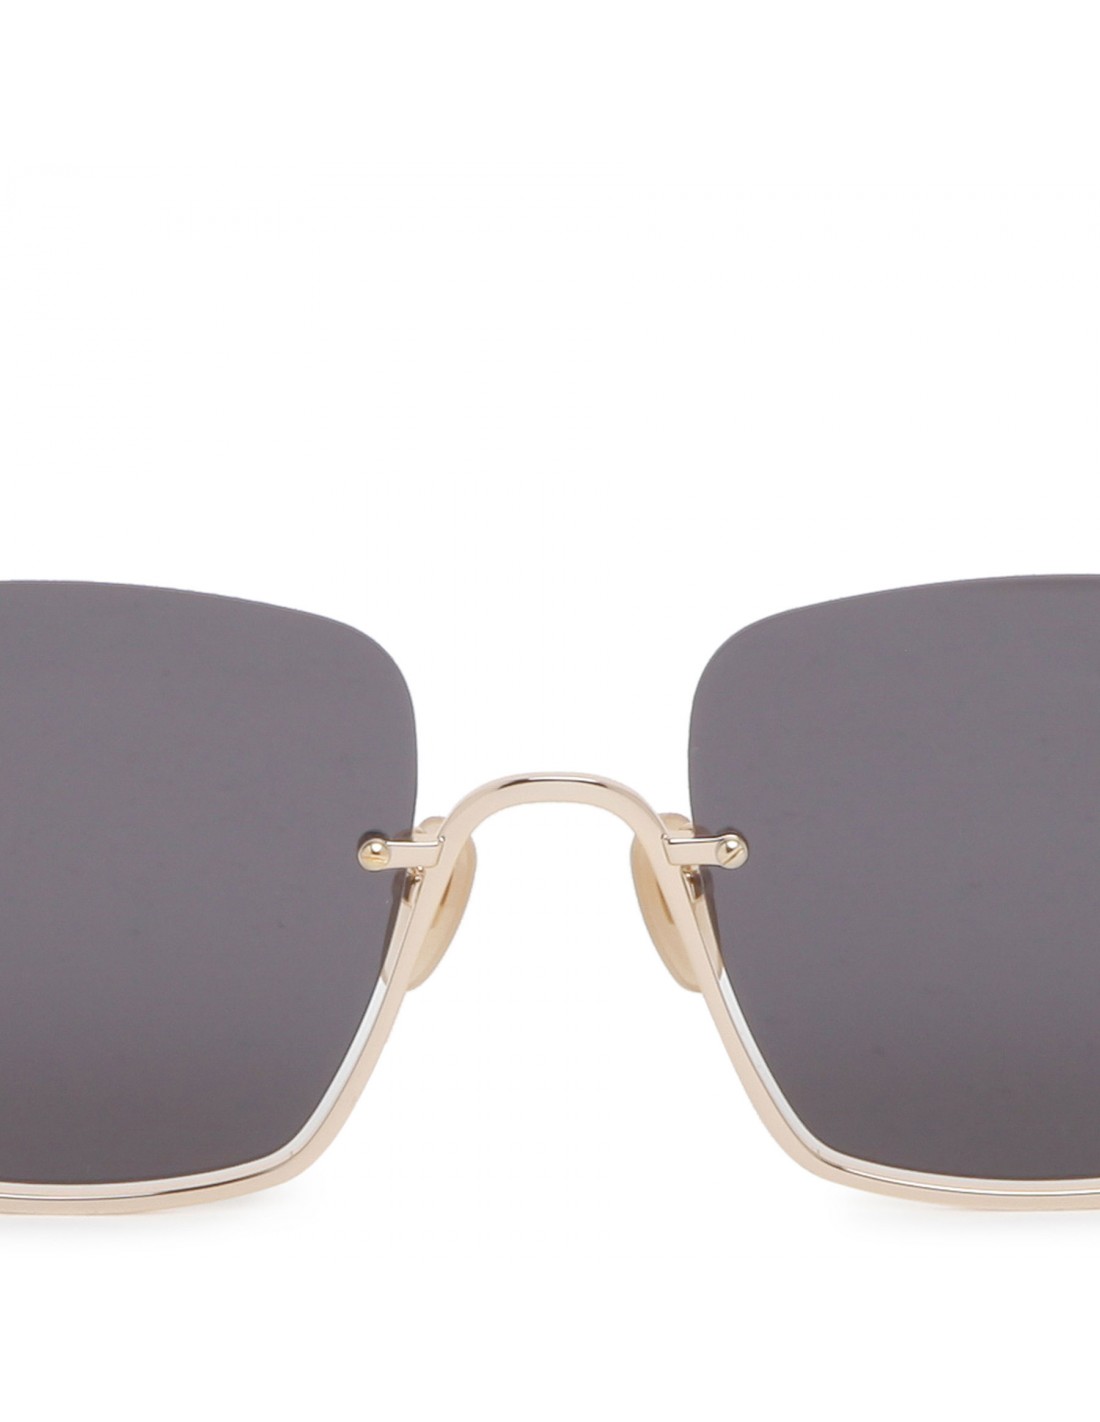 Double G squared sunglasses